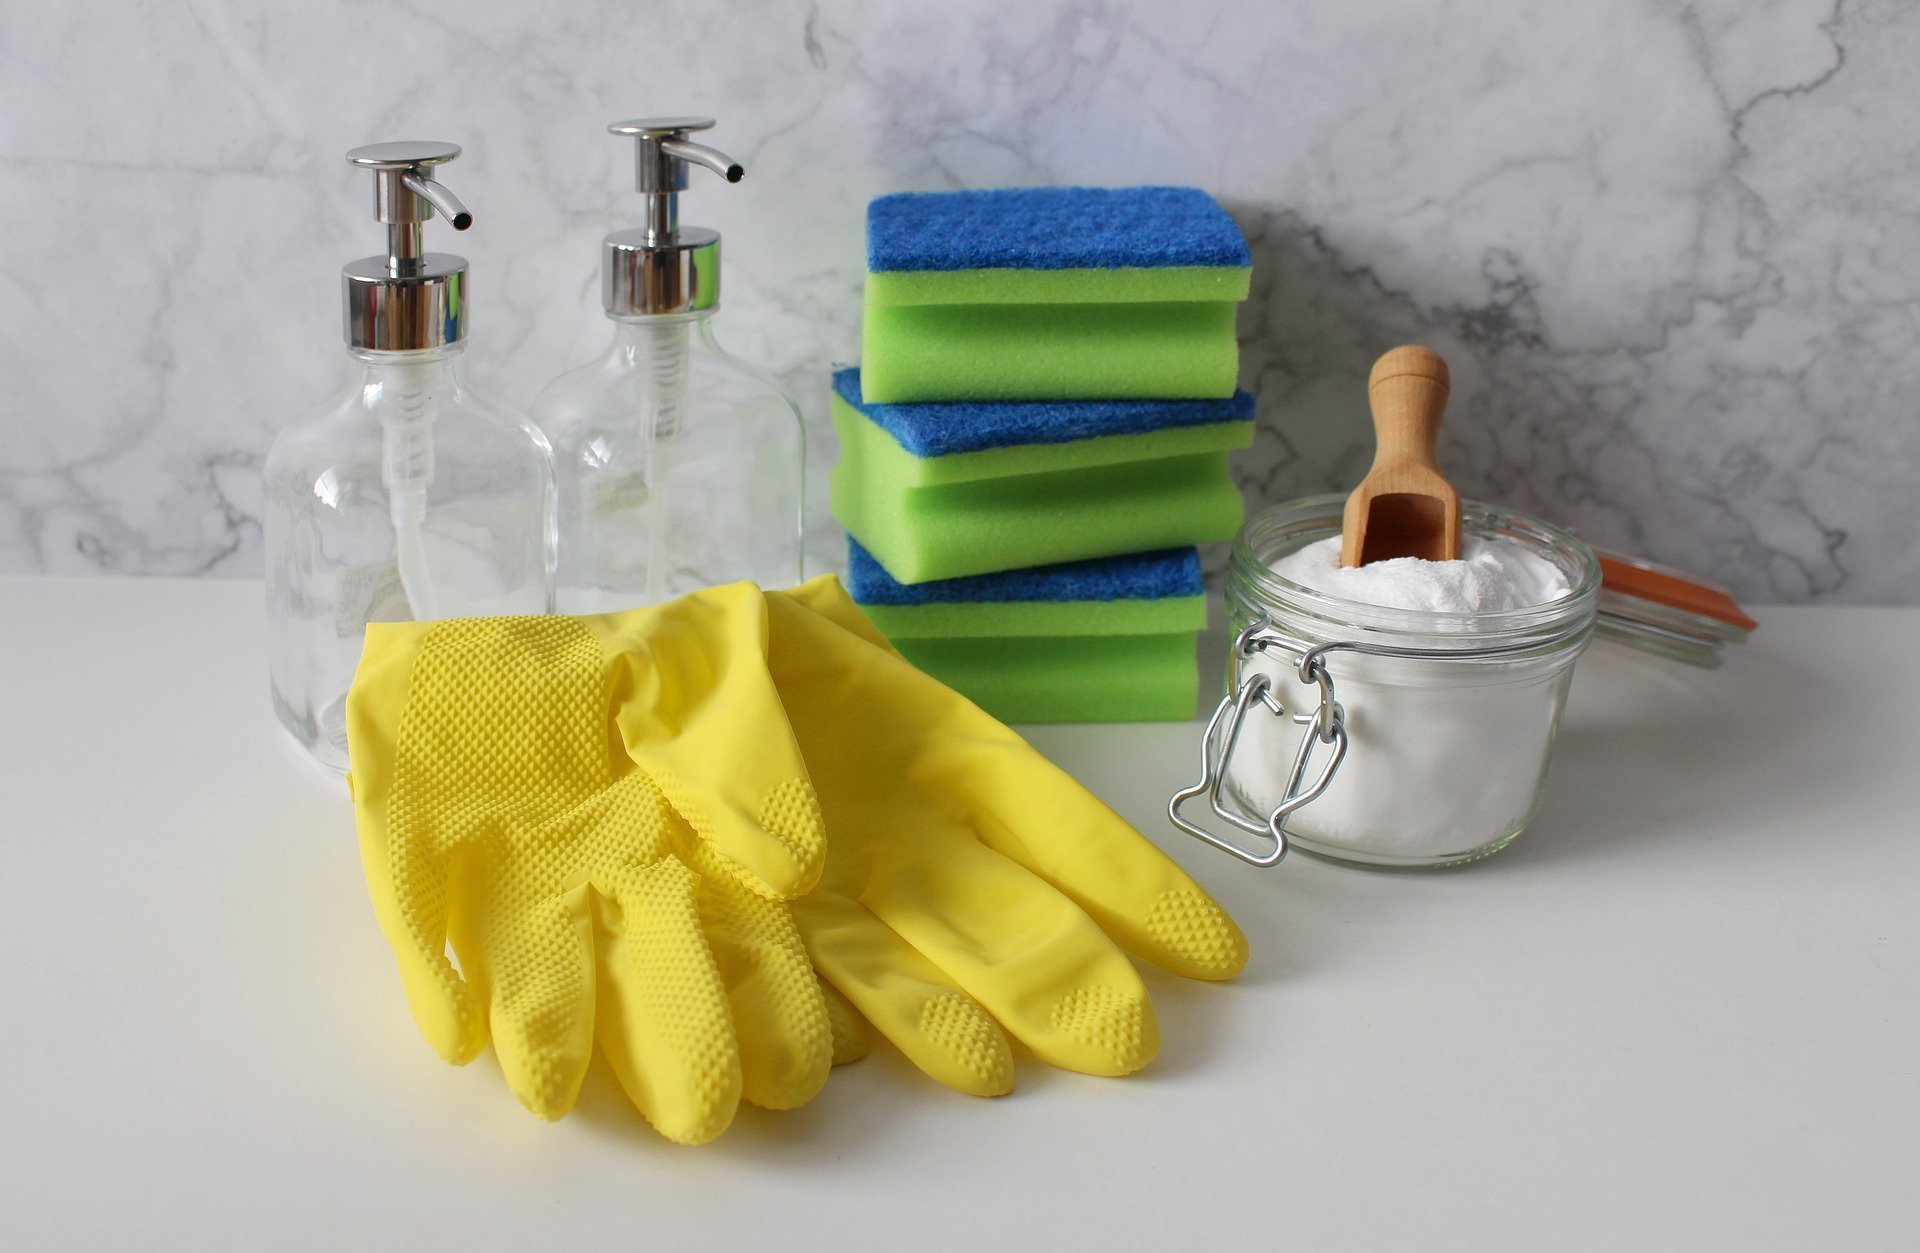 basic cleaning equipment such as gloves, sponges and some sprays